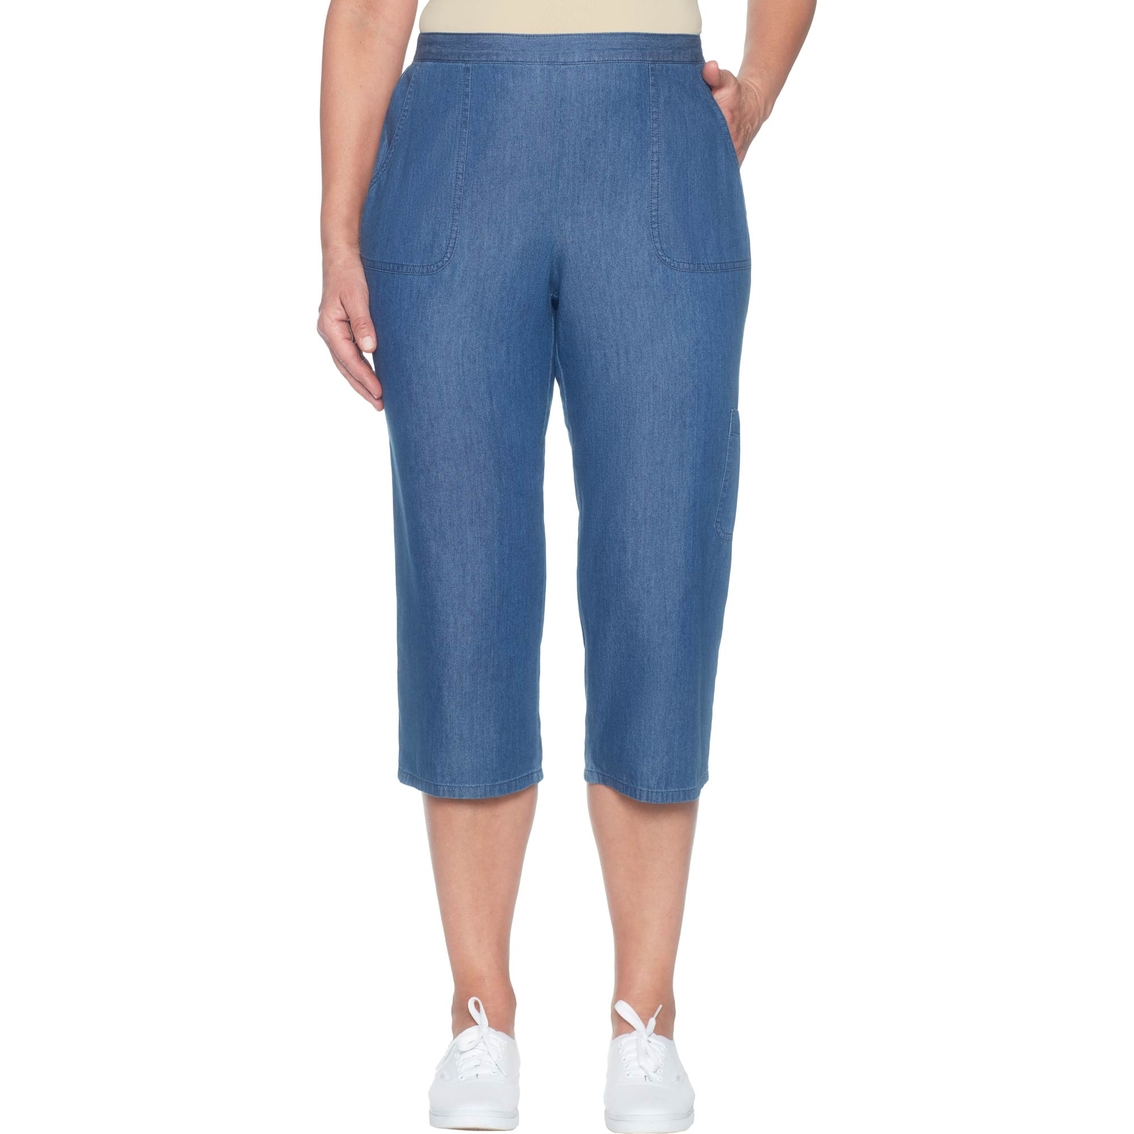 Alfred Dunner Cargo Capri Pants, Jeans, Clothing & Accessories